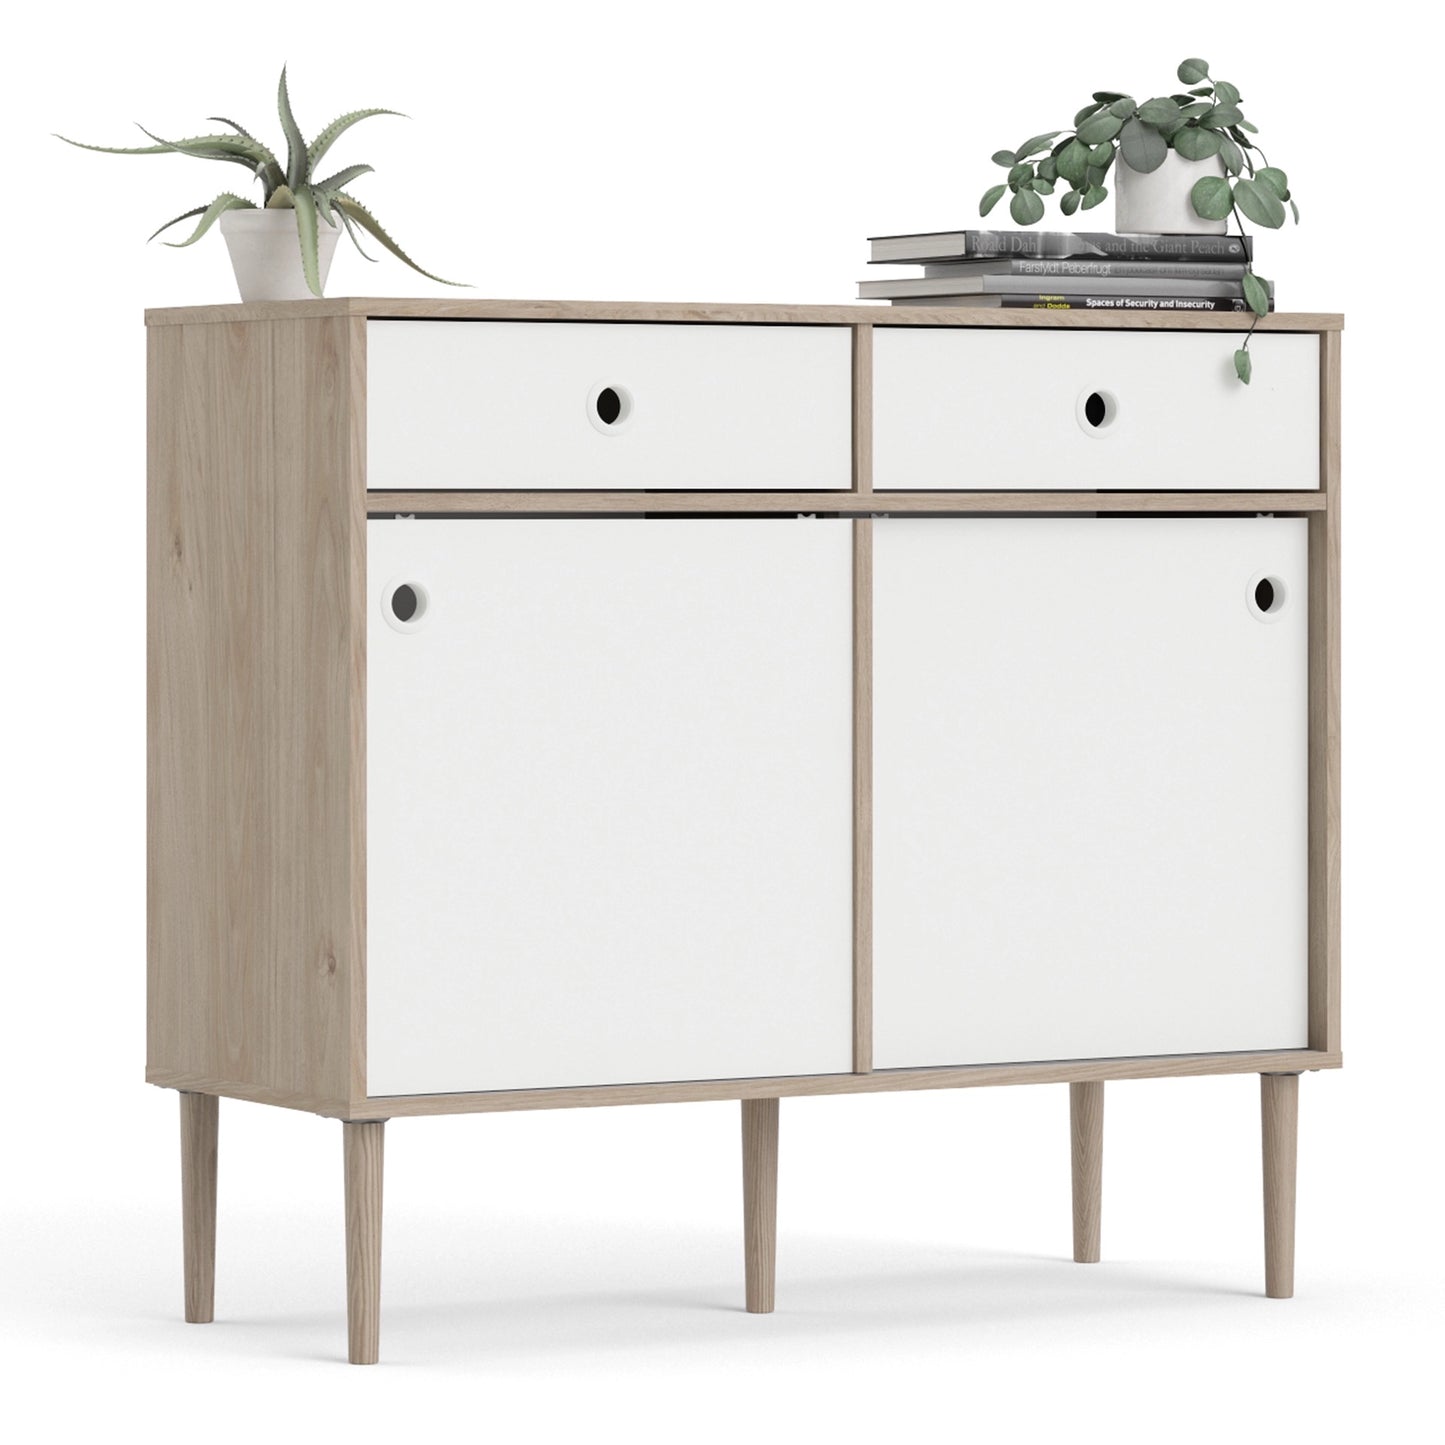 Furniture To Go Rome Sideboard 2 Sliding Doors + 2 Drawers in Jackson Hickory Oak with Matt White